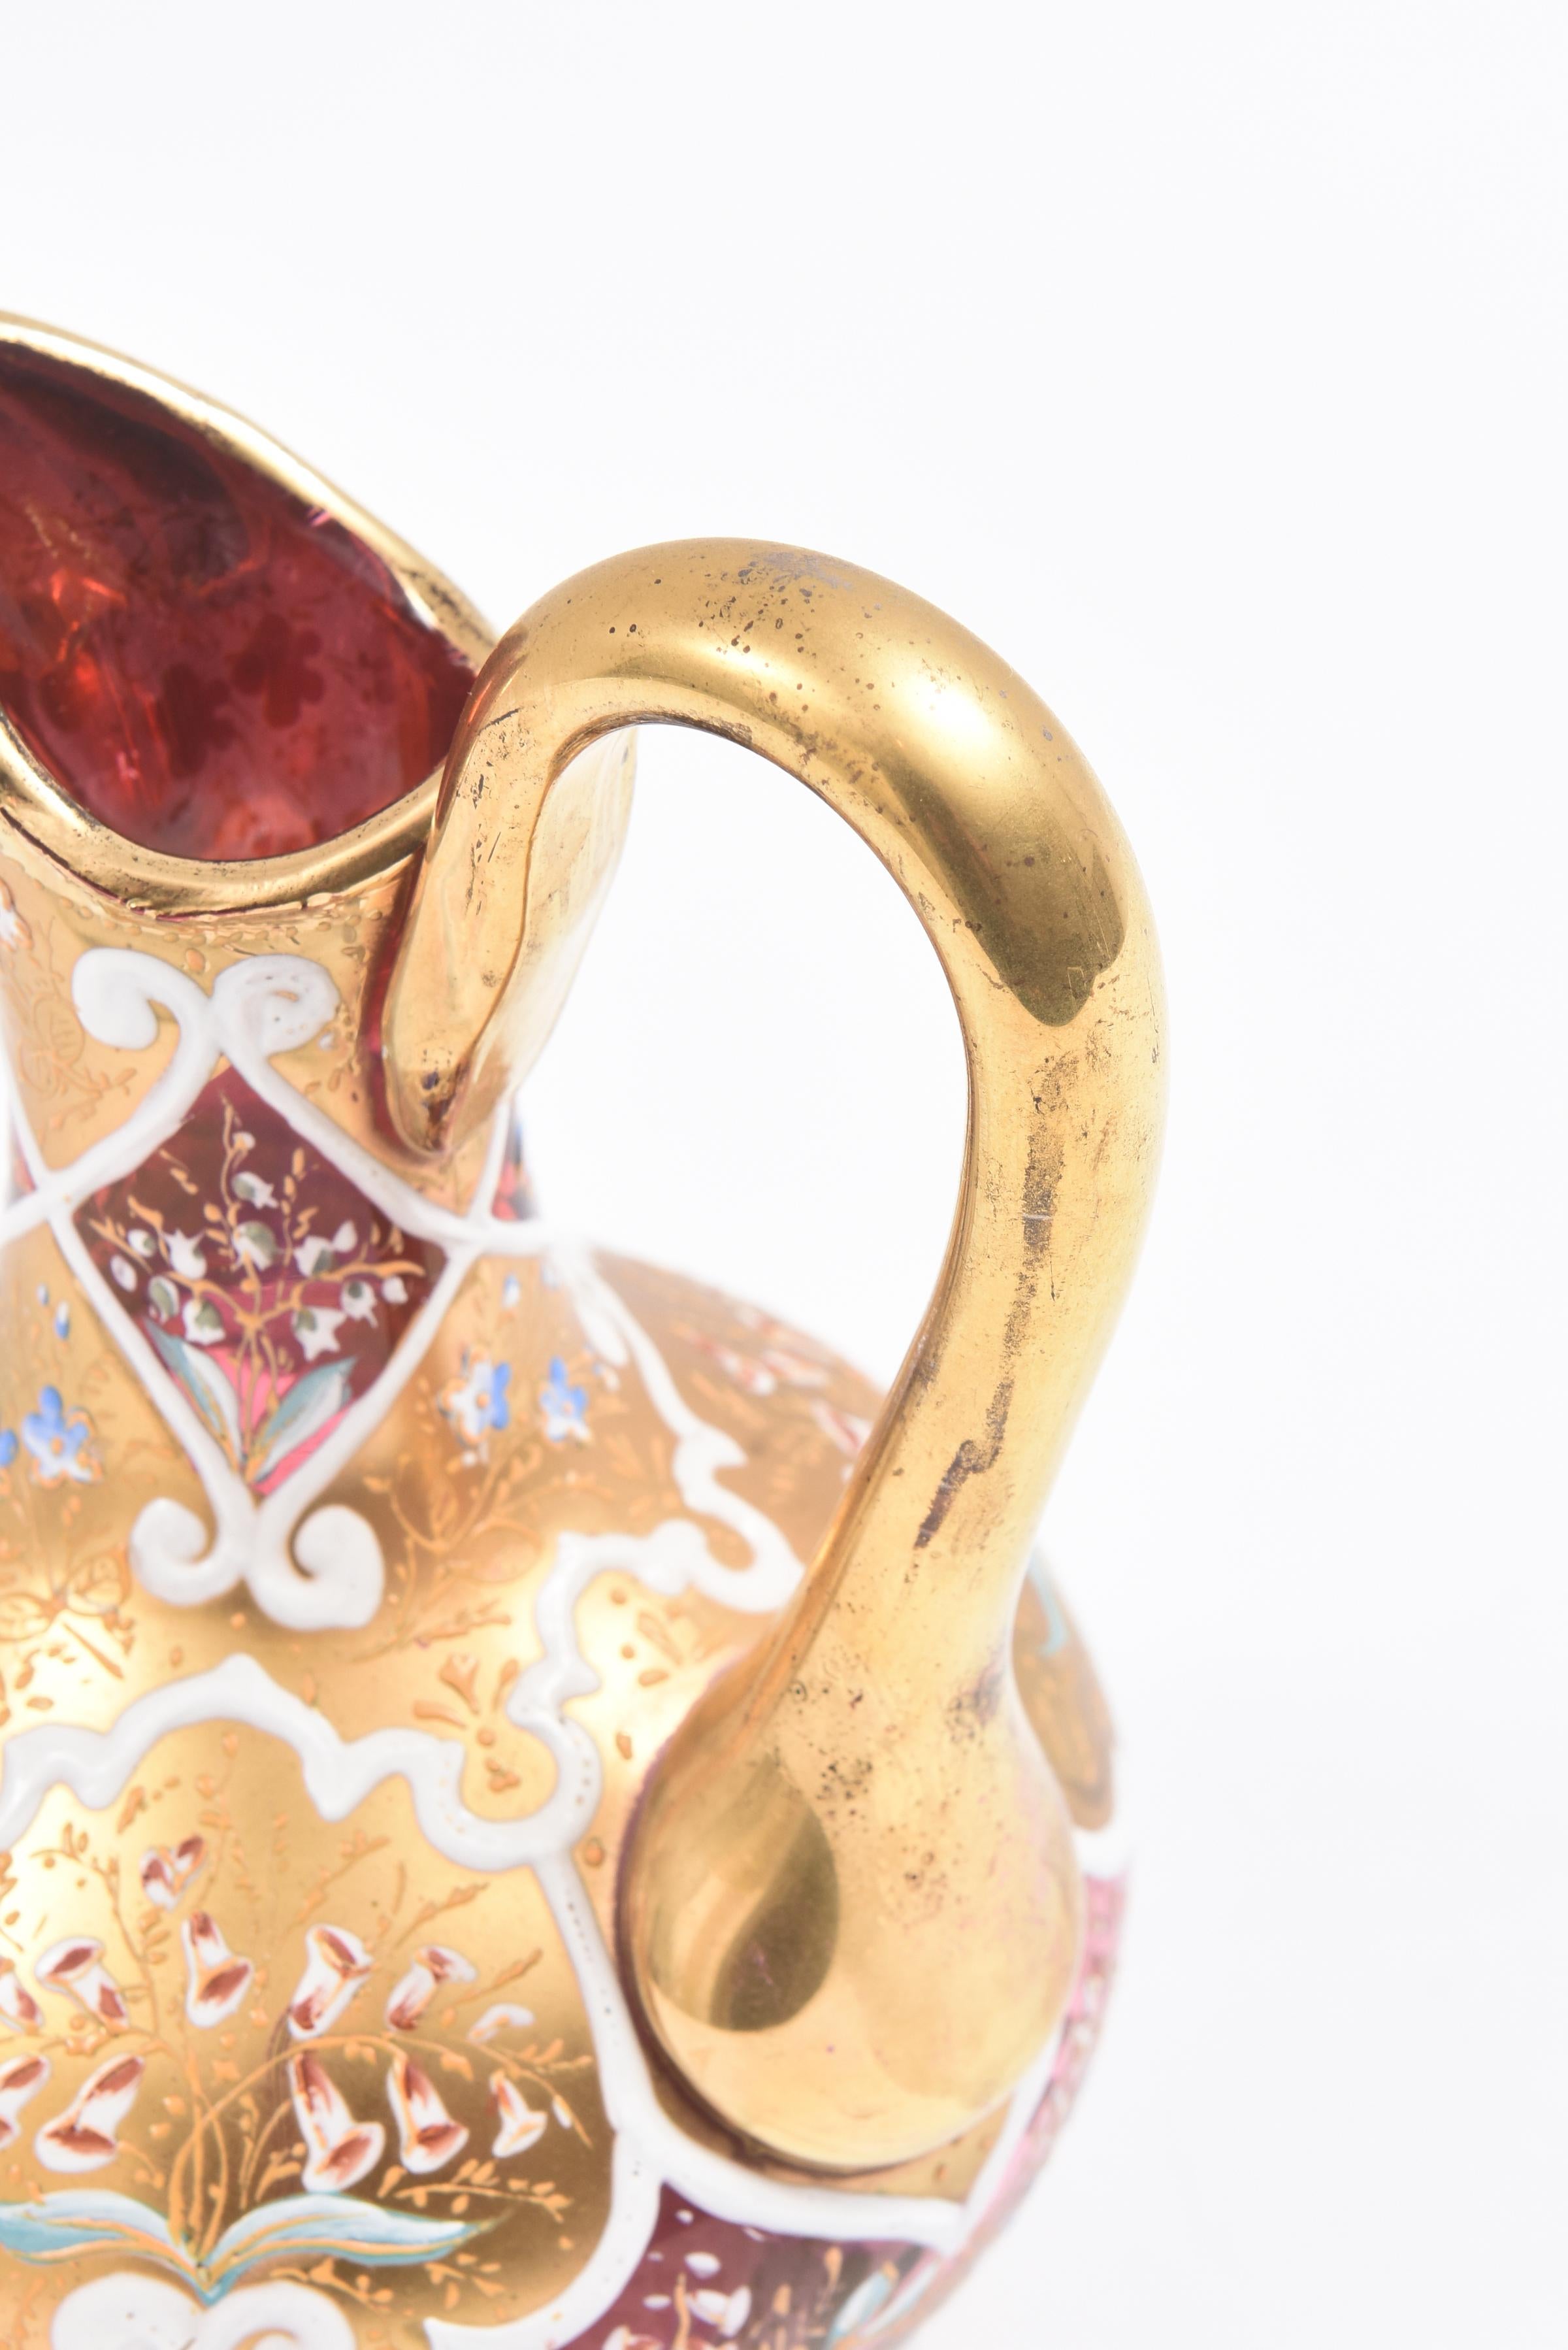 Ornate Moser Glass Enamel and Gilt Pitcher or Ewer, 19th Century For Sale 1